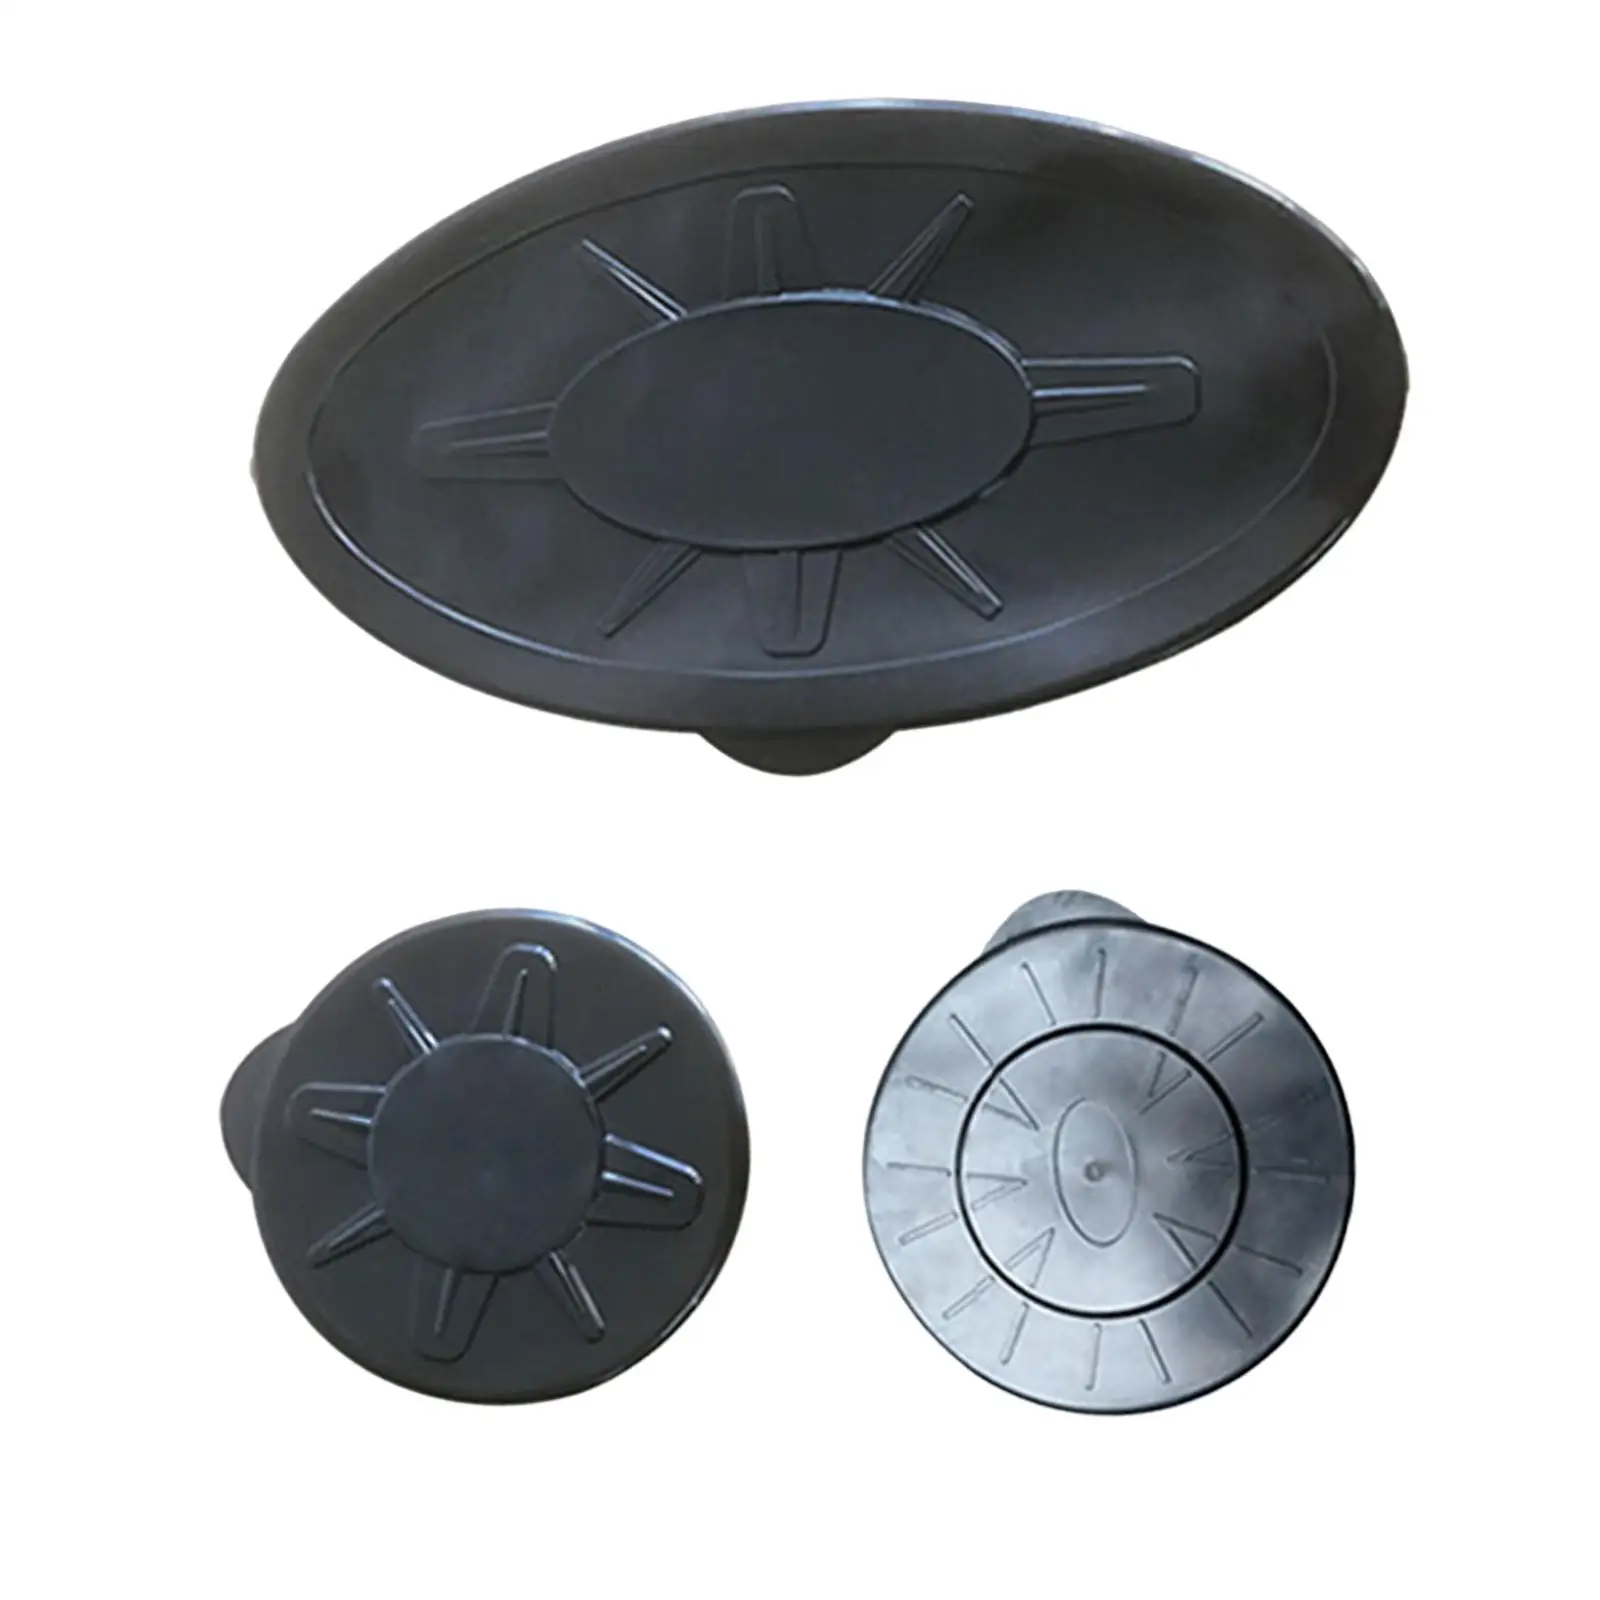 Kayak Accessories Access Cover Parts for Kayak Marine